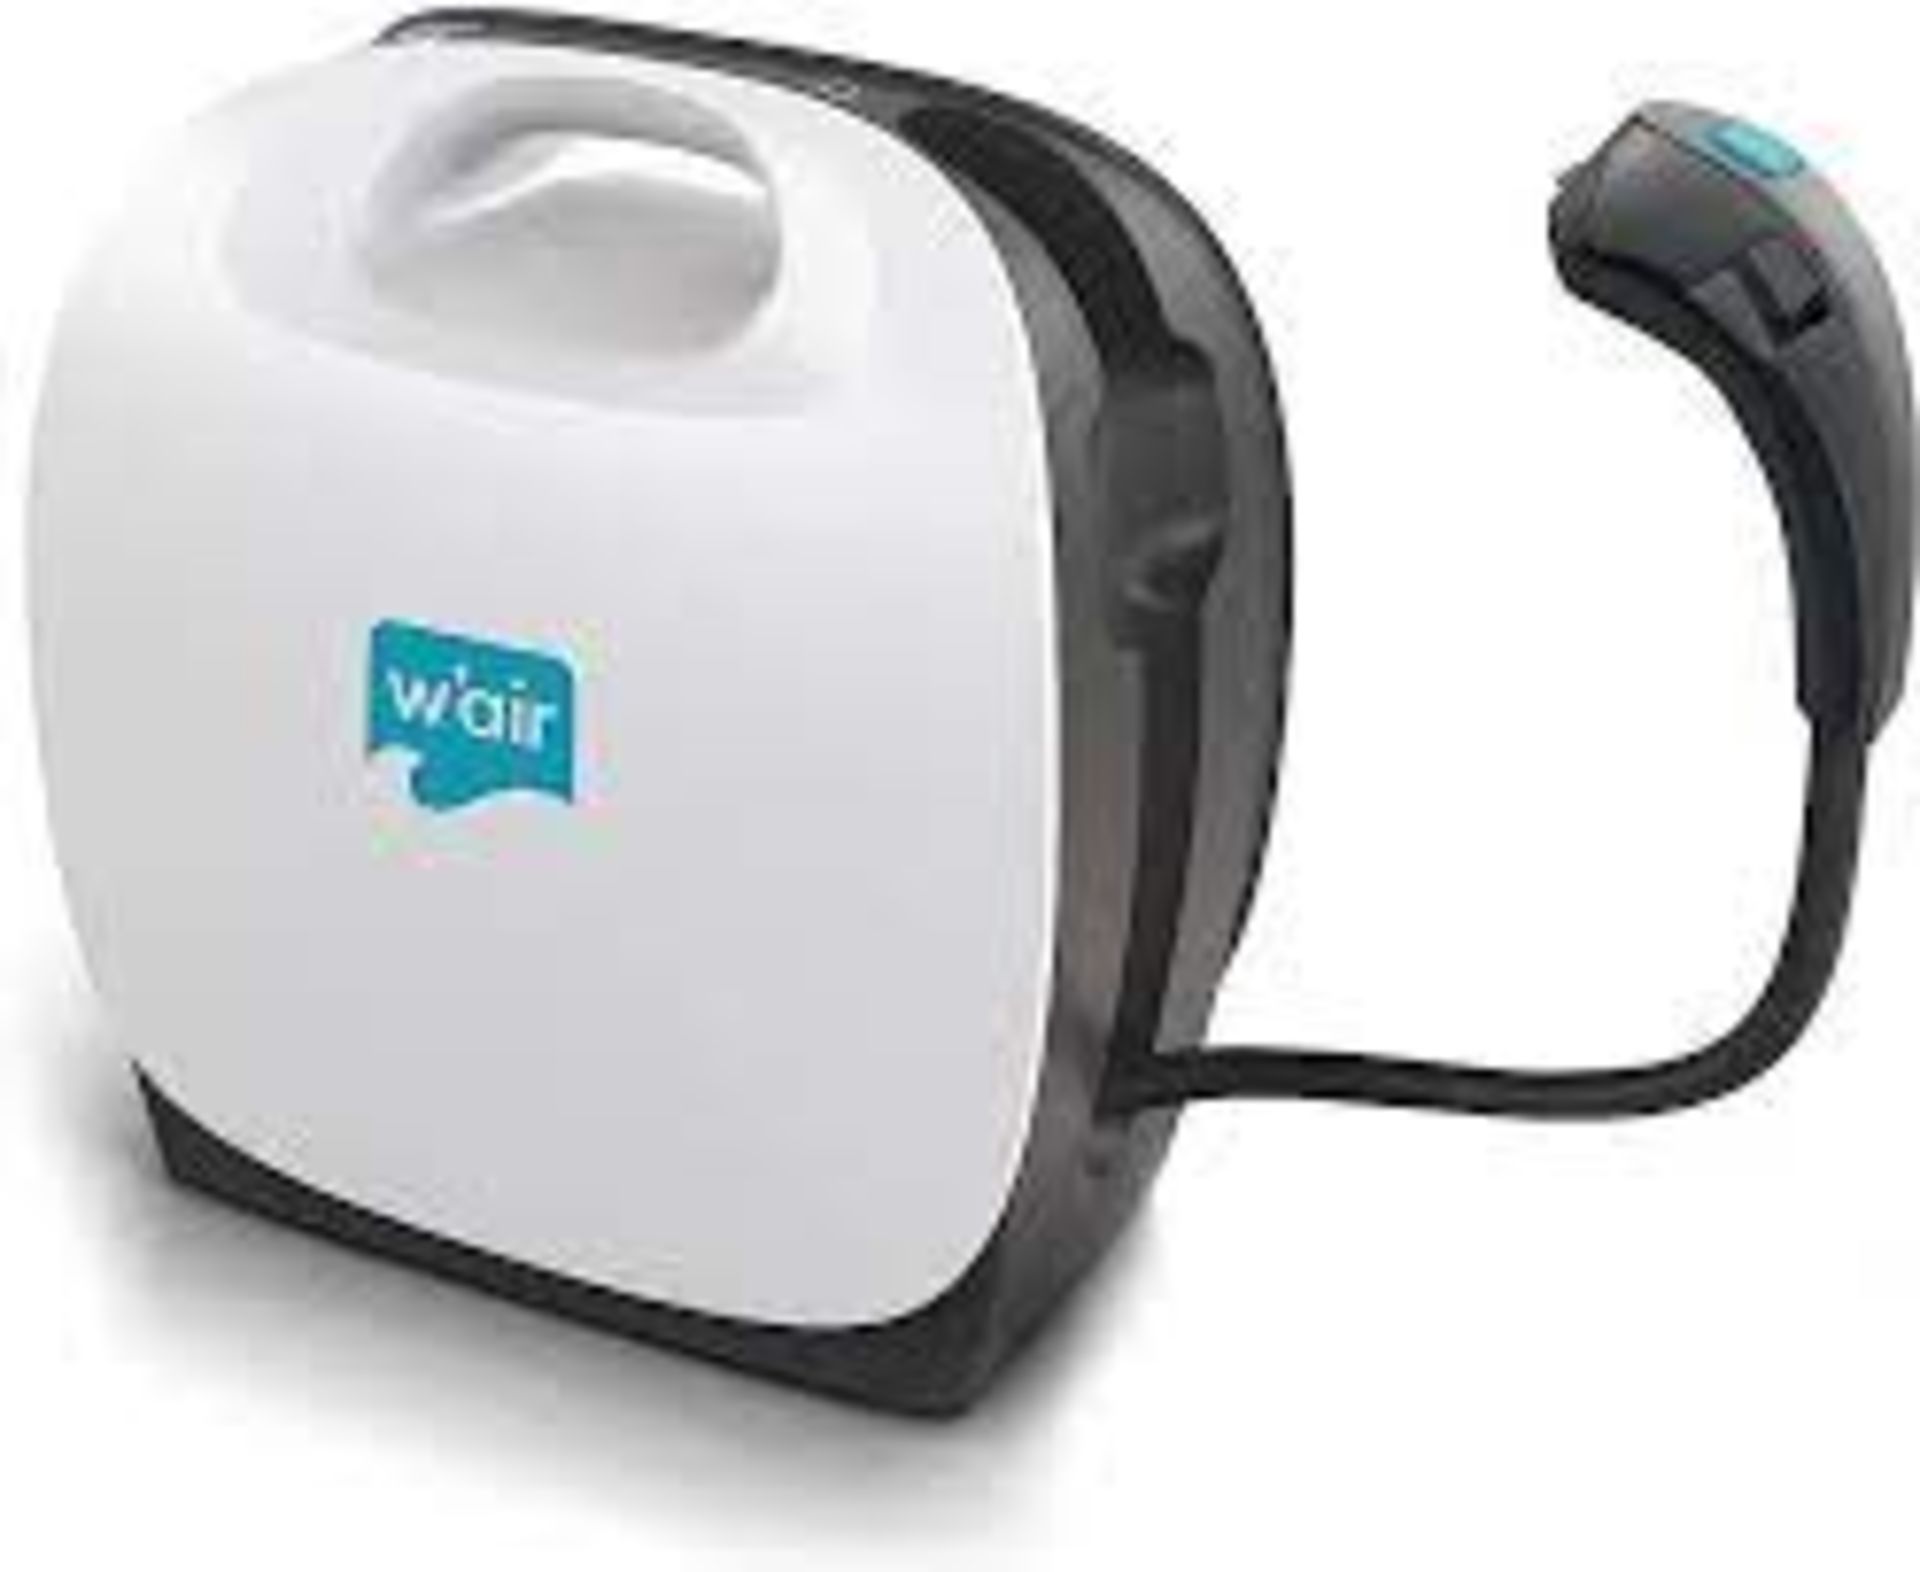 50 X BRAND NEW W'AIR SNEAKER CLEANING SYSTEMS RRP £299, The w'air uses hydrodynamic technology - Bild 6 aus 6